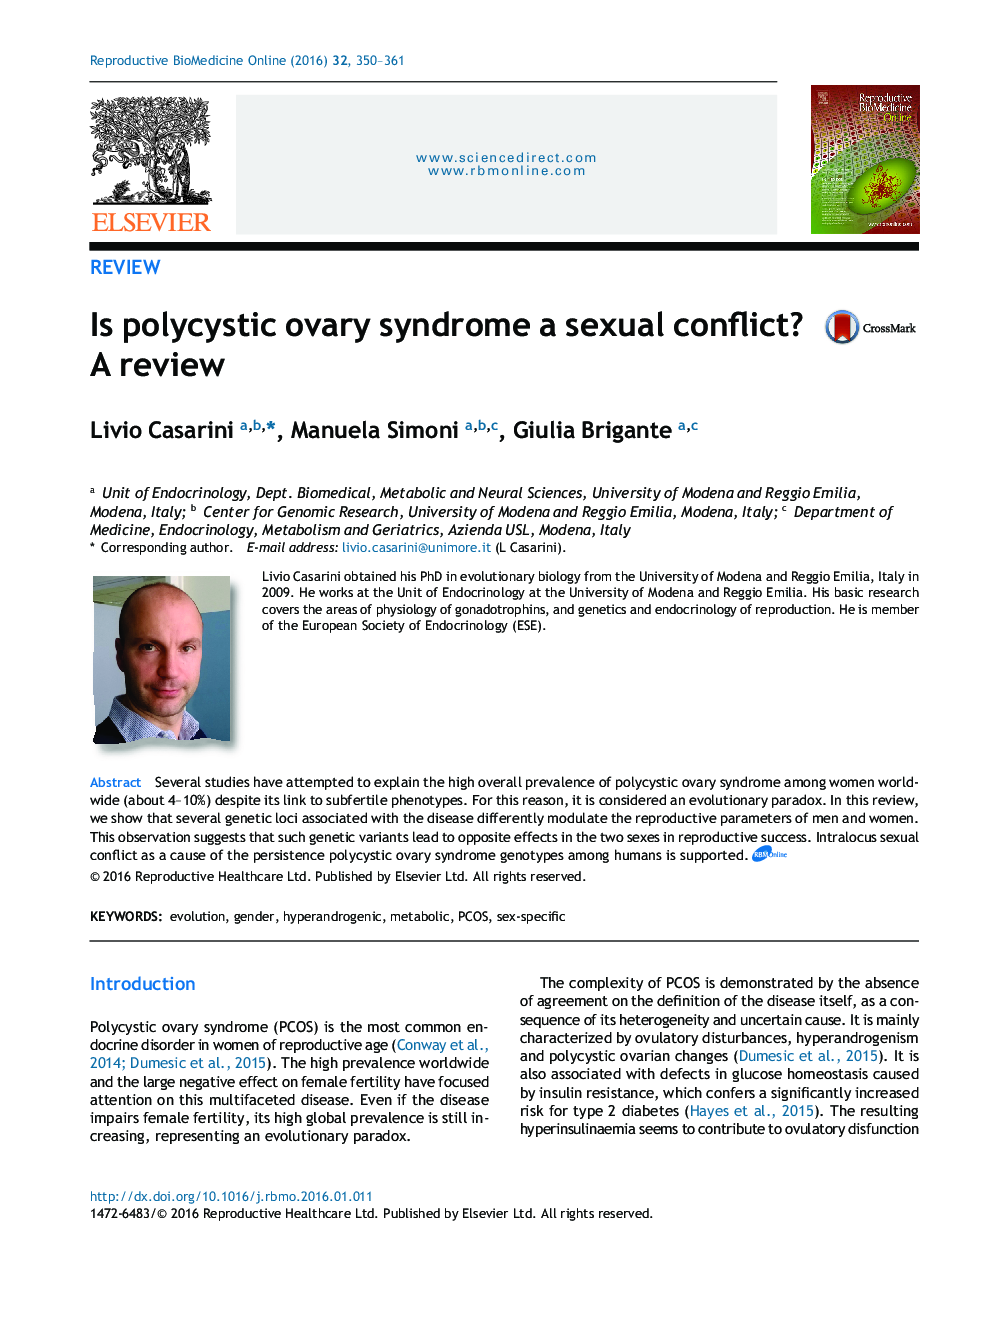 Is polycystic ovary syndrome a sexual conflict? A review